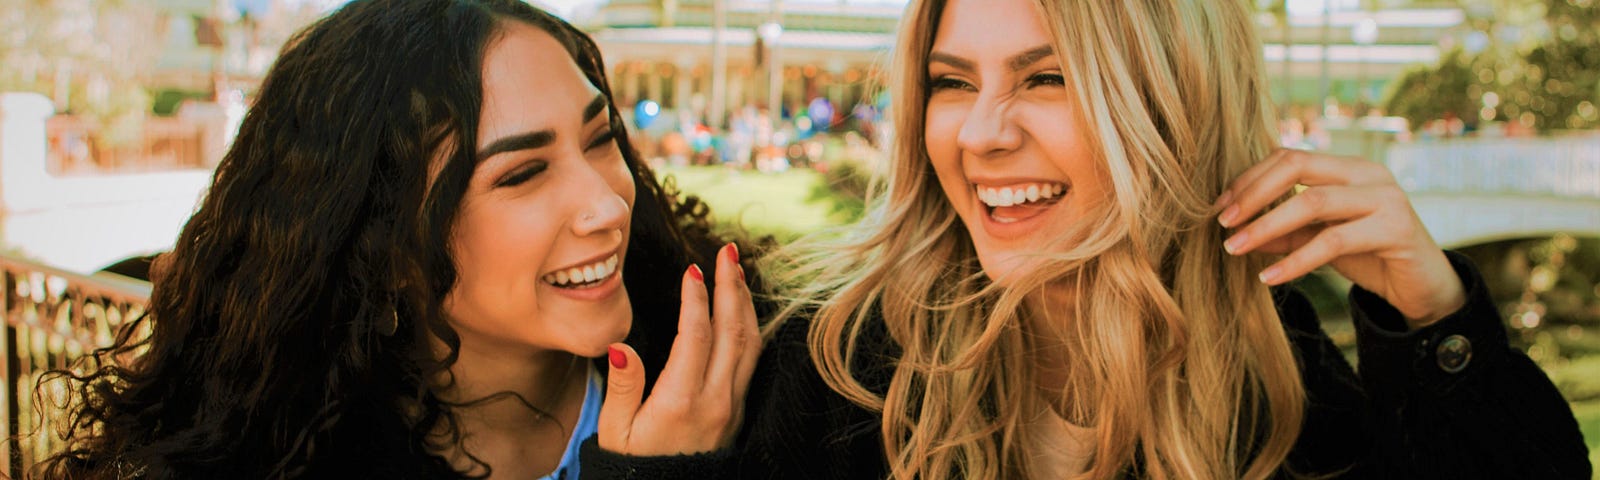 Two girls wearing dark tops smiling and laughing